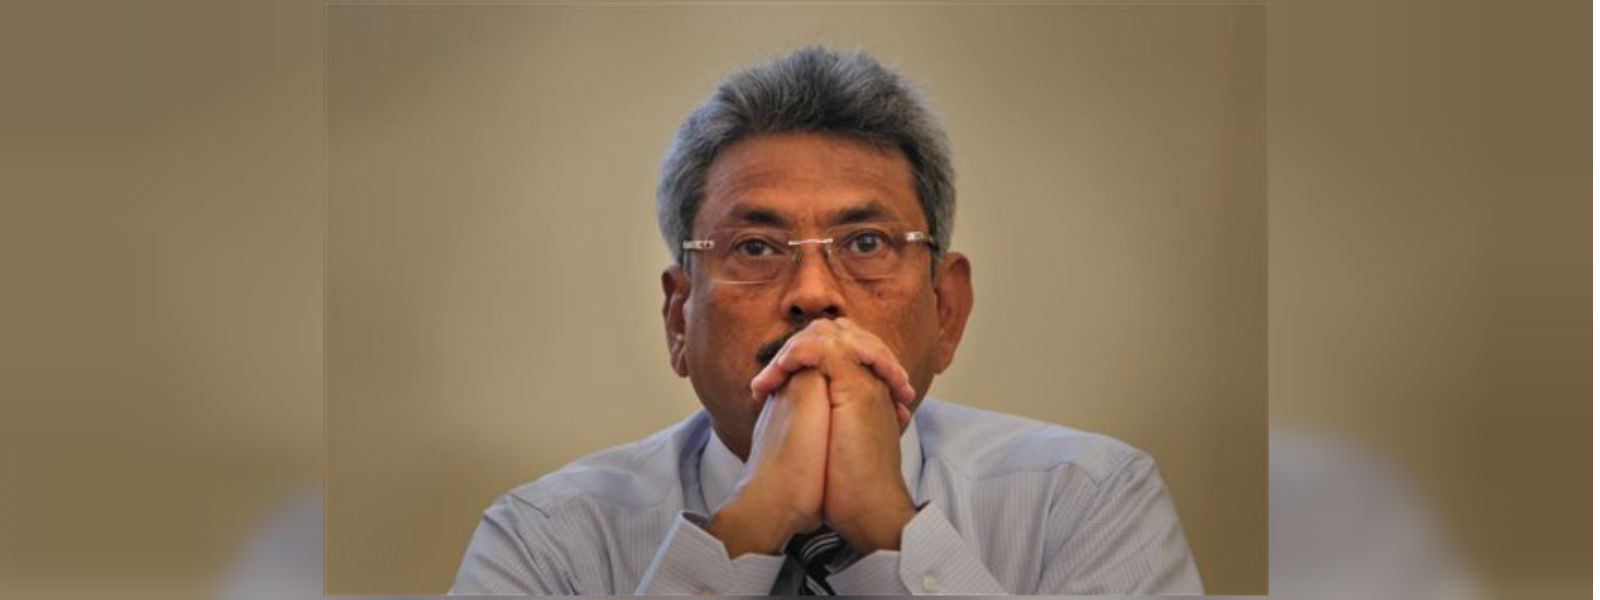 Gota says he will run for president this year